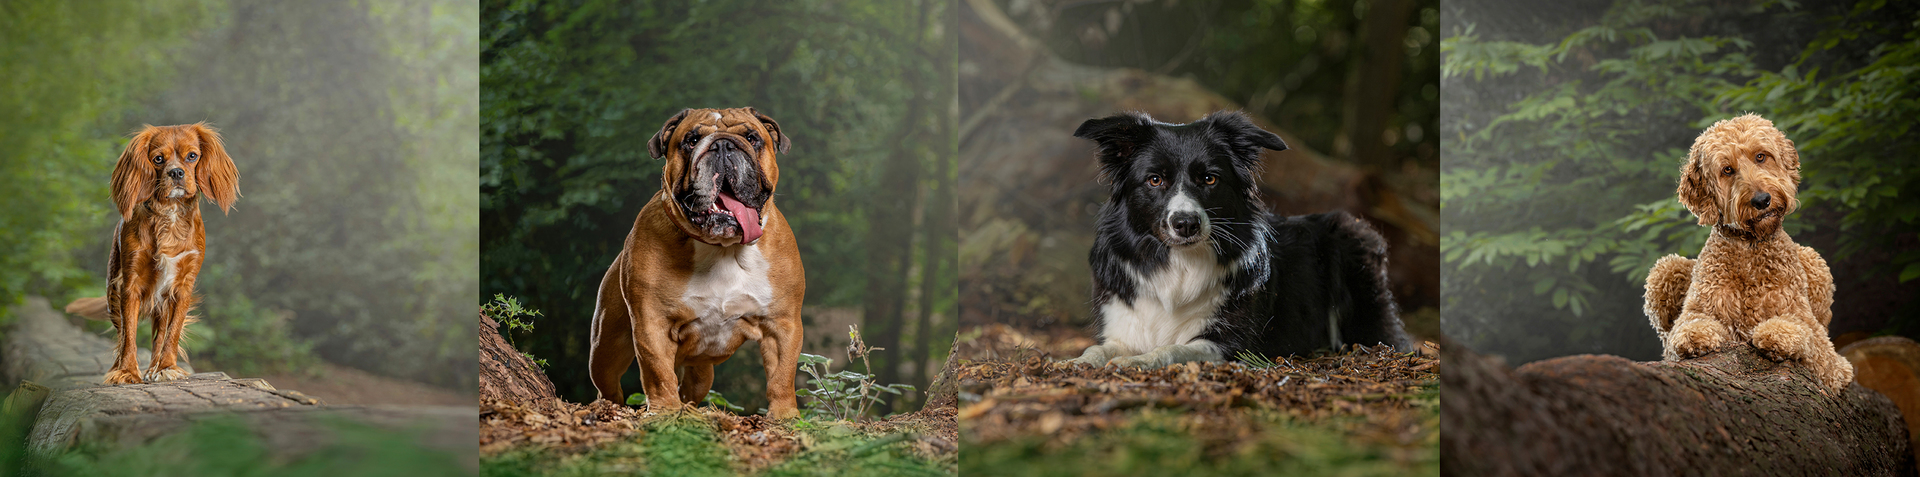 Dog photography sessions book now